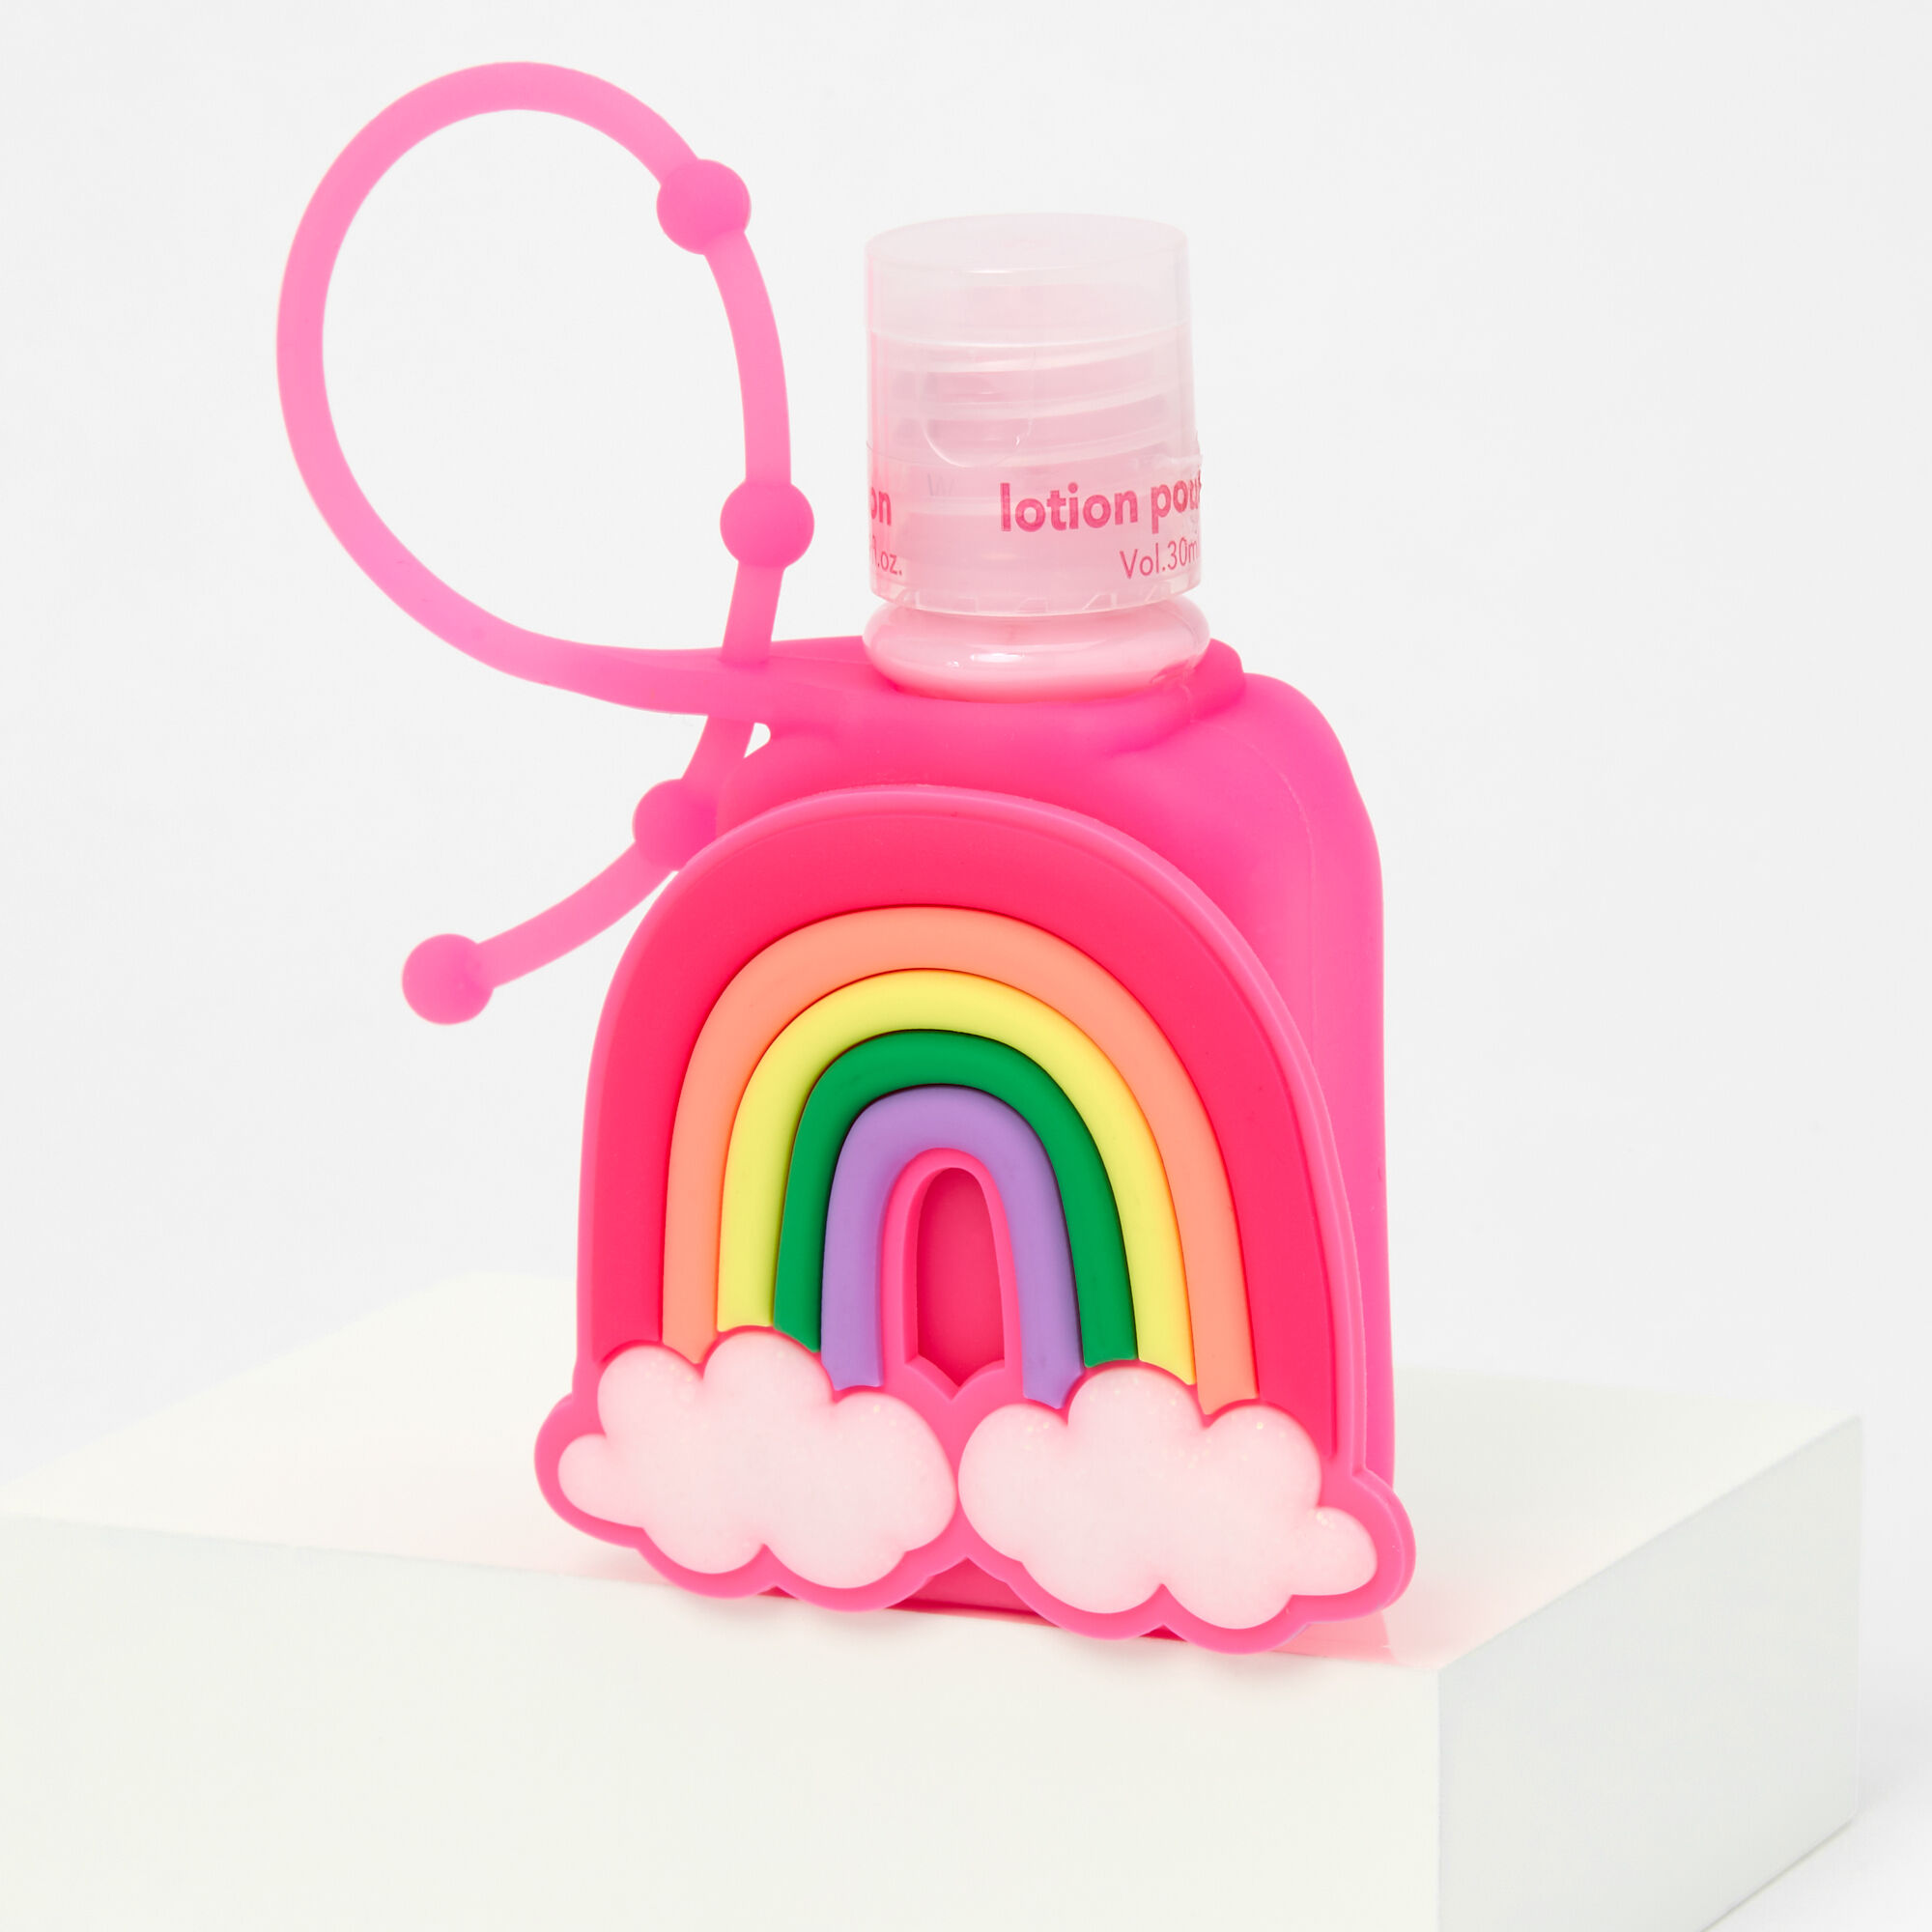 View Claires Rainbow Hand Lotion Watermelon Pink information